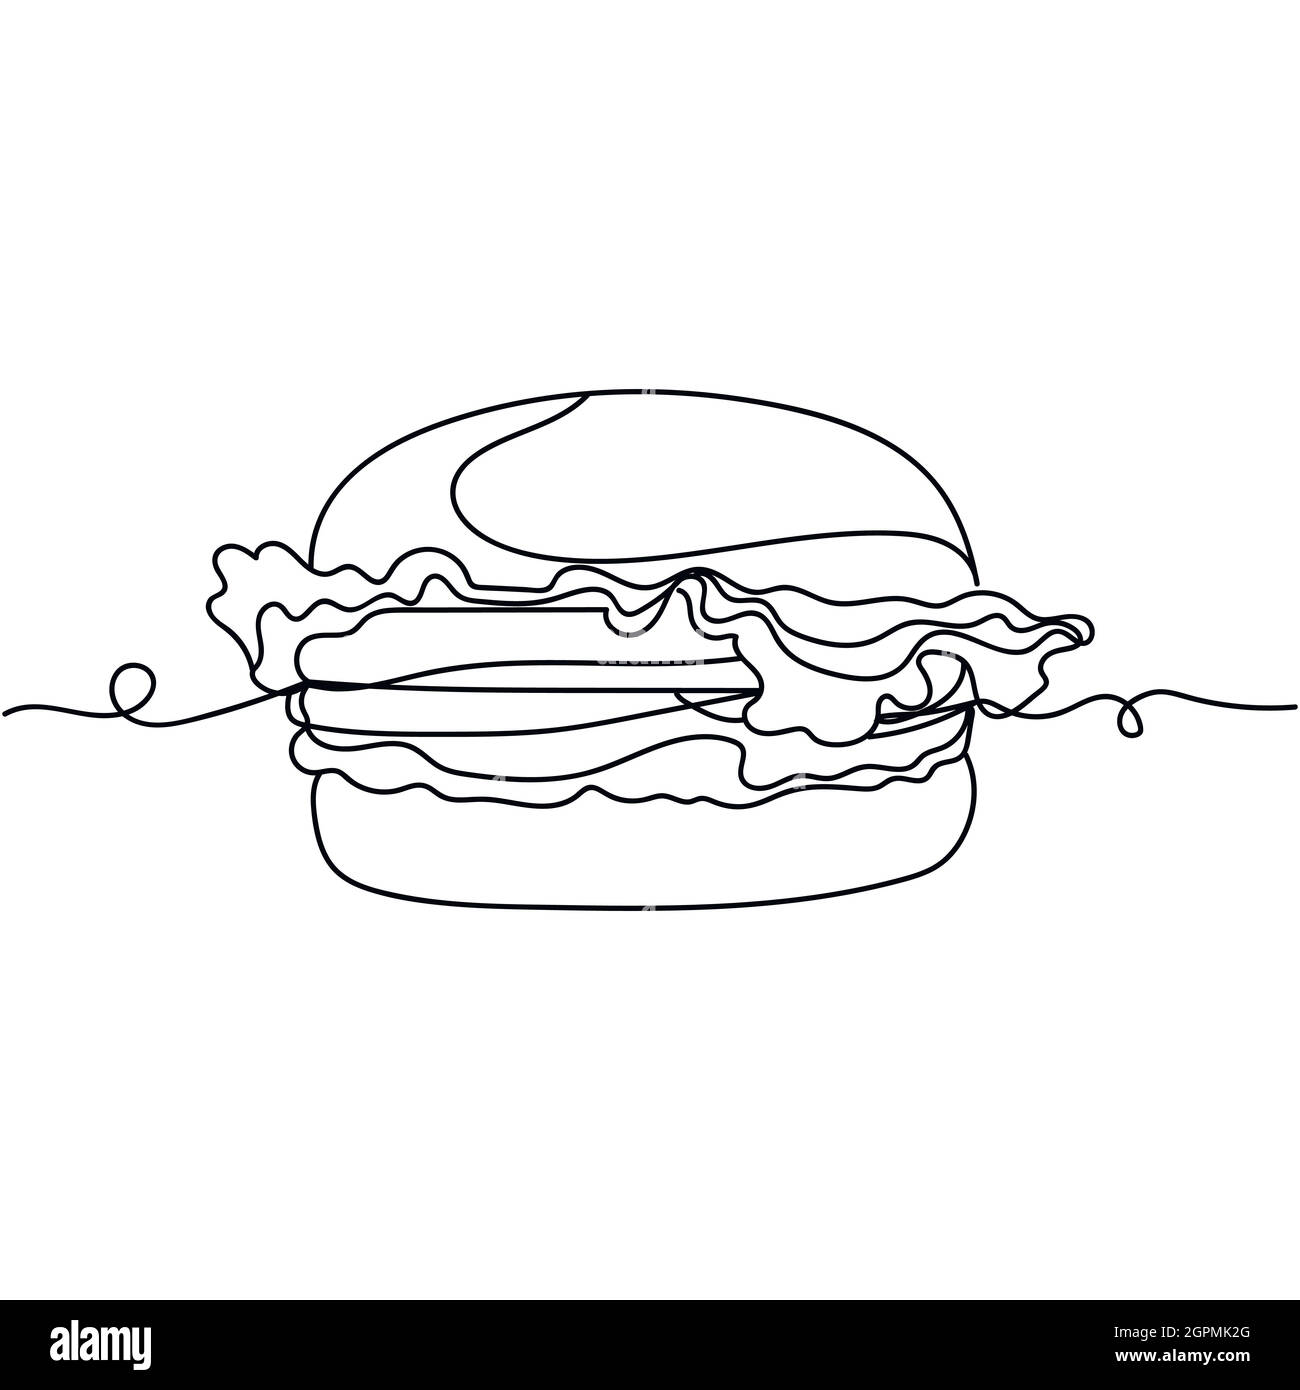 Continuous one line of burger in silhouette. Minimal style. Perfect for cards, party invitations, posters, stickers, clothing. Black abstract icon. Stock Vector